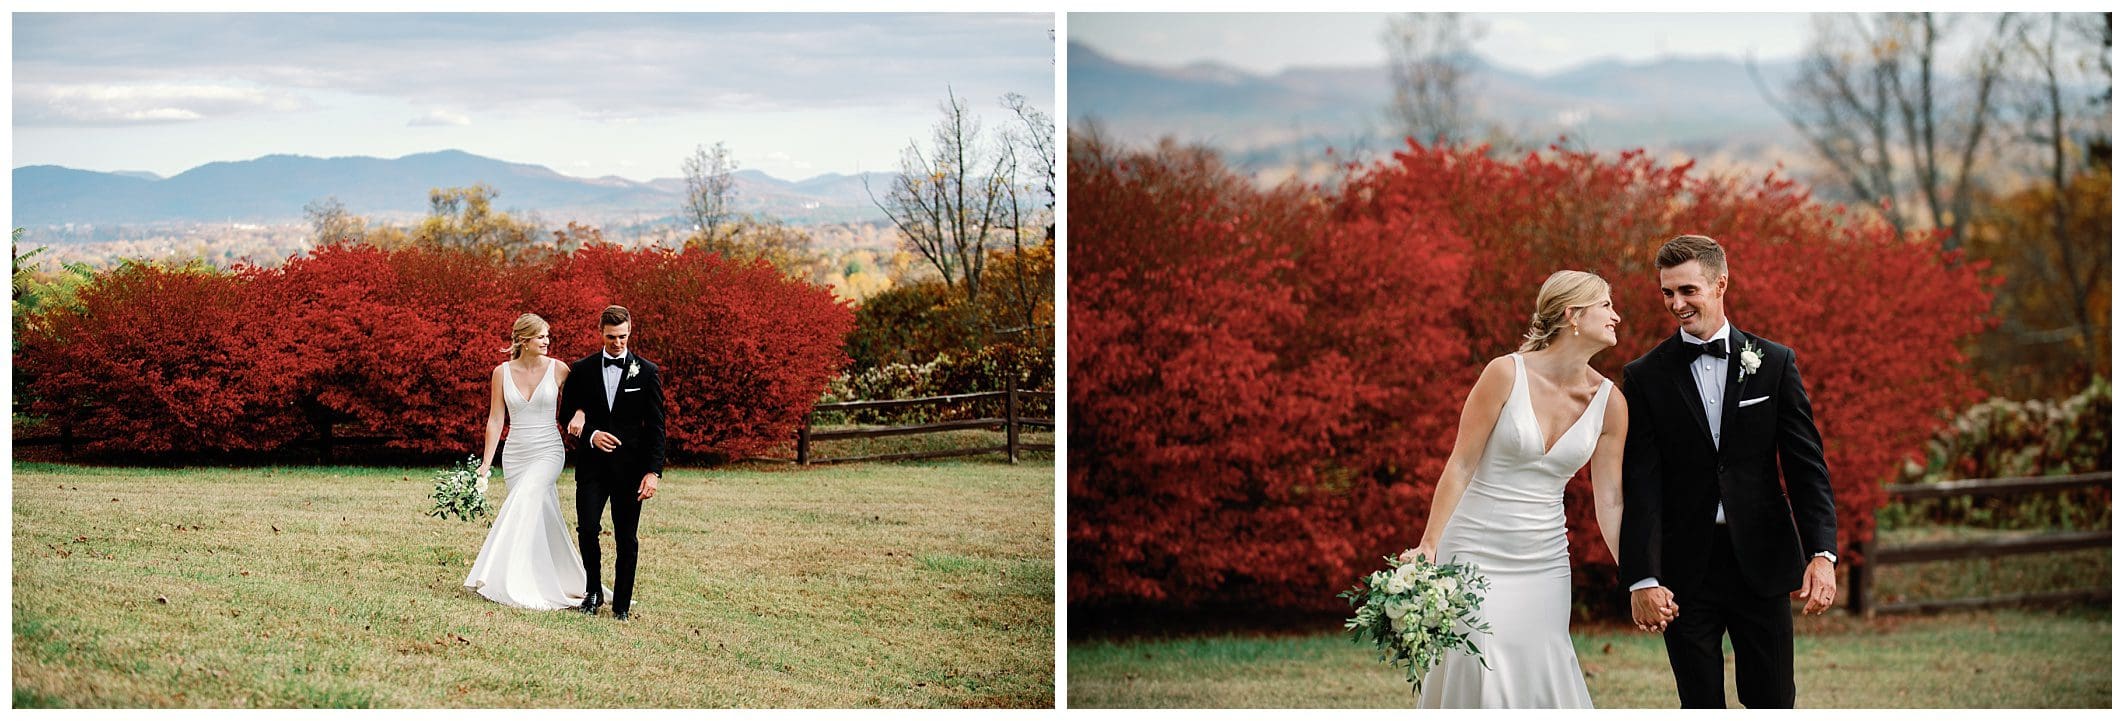 A fall wedding at Crest Center, with the bride and groom standing in front of vibrant red bushes.